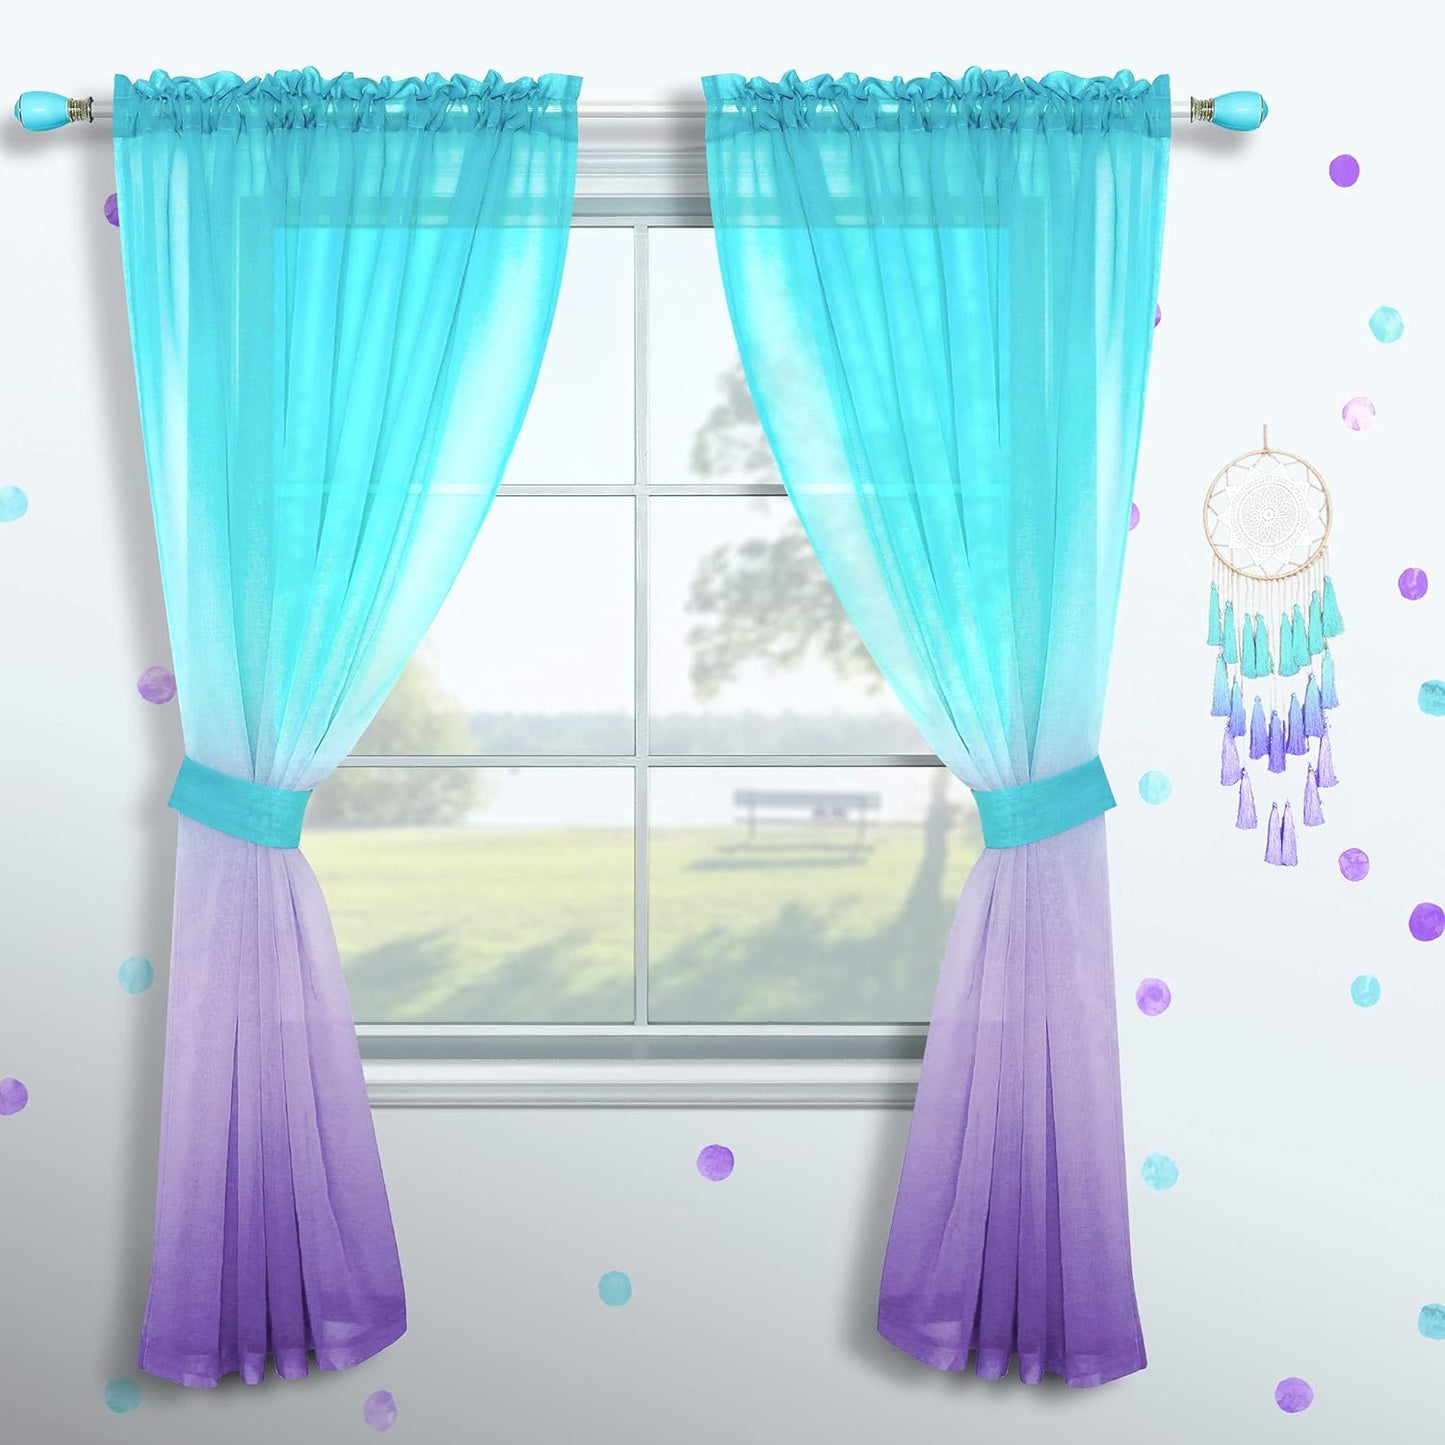 Pink and Purple Curtains for Girls Bedroom Decor Set 1 Single Panel Pocket Window Voile Pastel Sheer Ombre Rainbow Curtain for Kid Room Decoration Teen Princess 63 Inch Length Gradient Lilac Lavender  MRS.NATURALL TEXTILE Green And Purple 52X84 